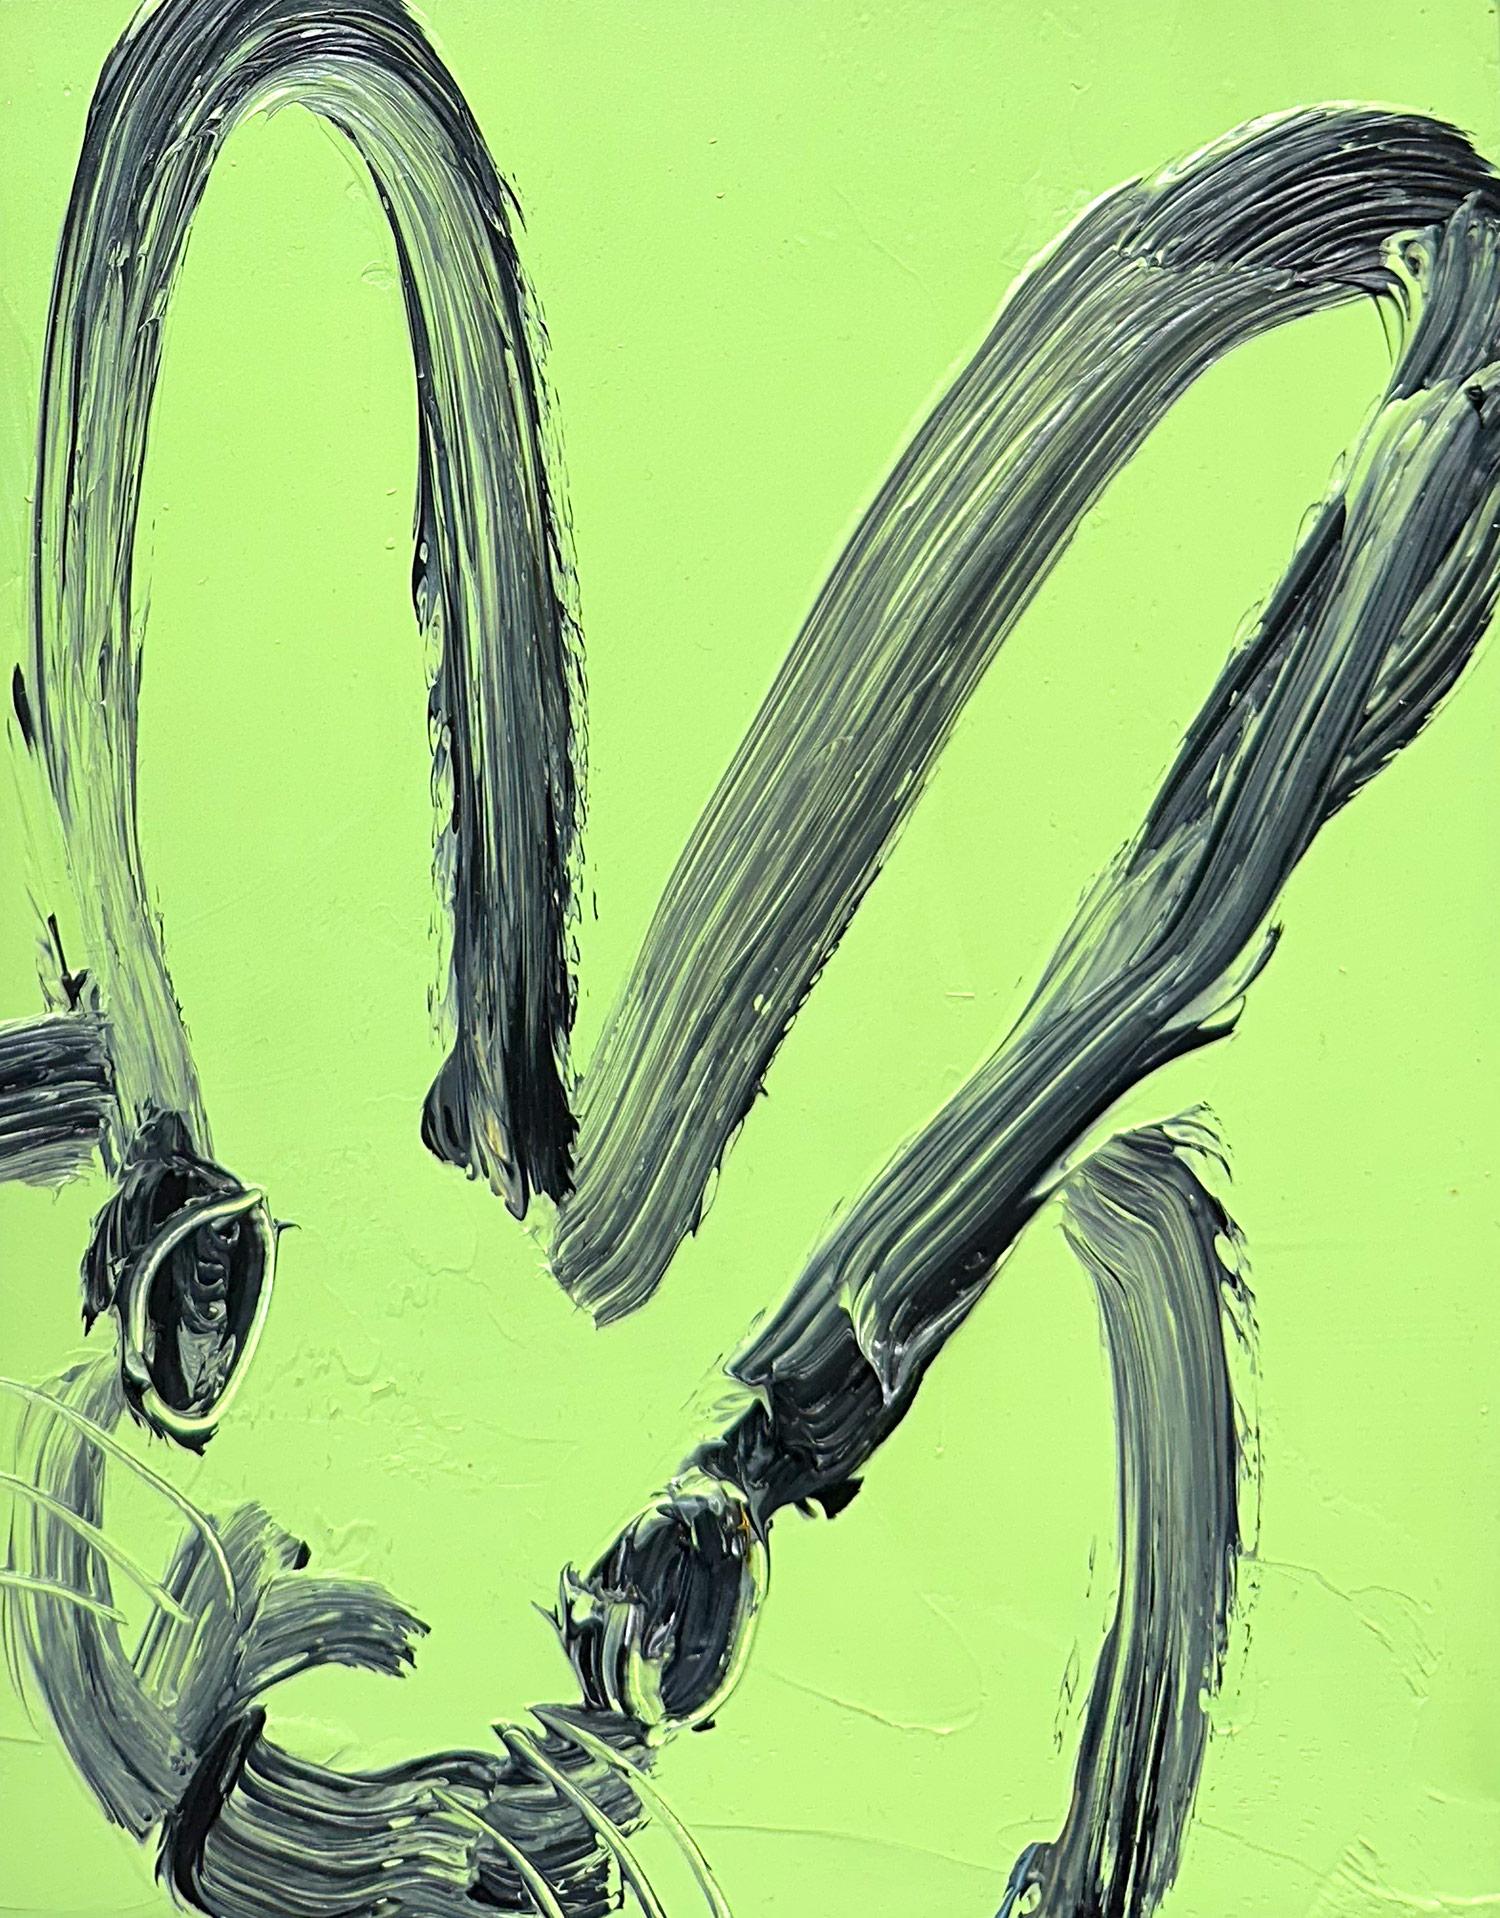 A wonderful composition of one of Slonem's most iconic subjects, Bunnies. This piece depicts a gestural figure of a black bunny on a Mint green background with thick use of paint. Inspired by nature and a genuine love for animals, Slonem's paintings